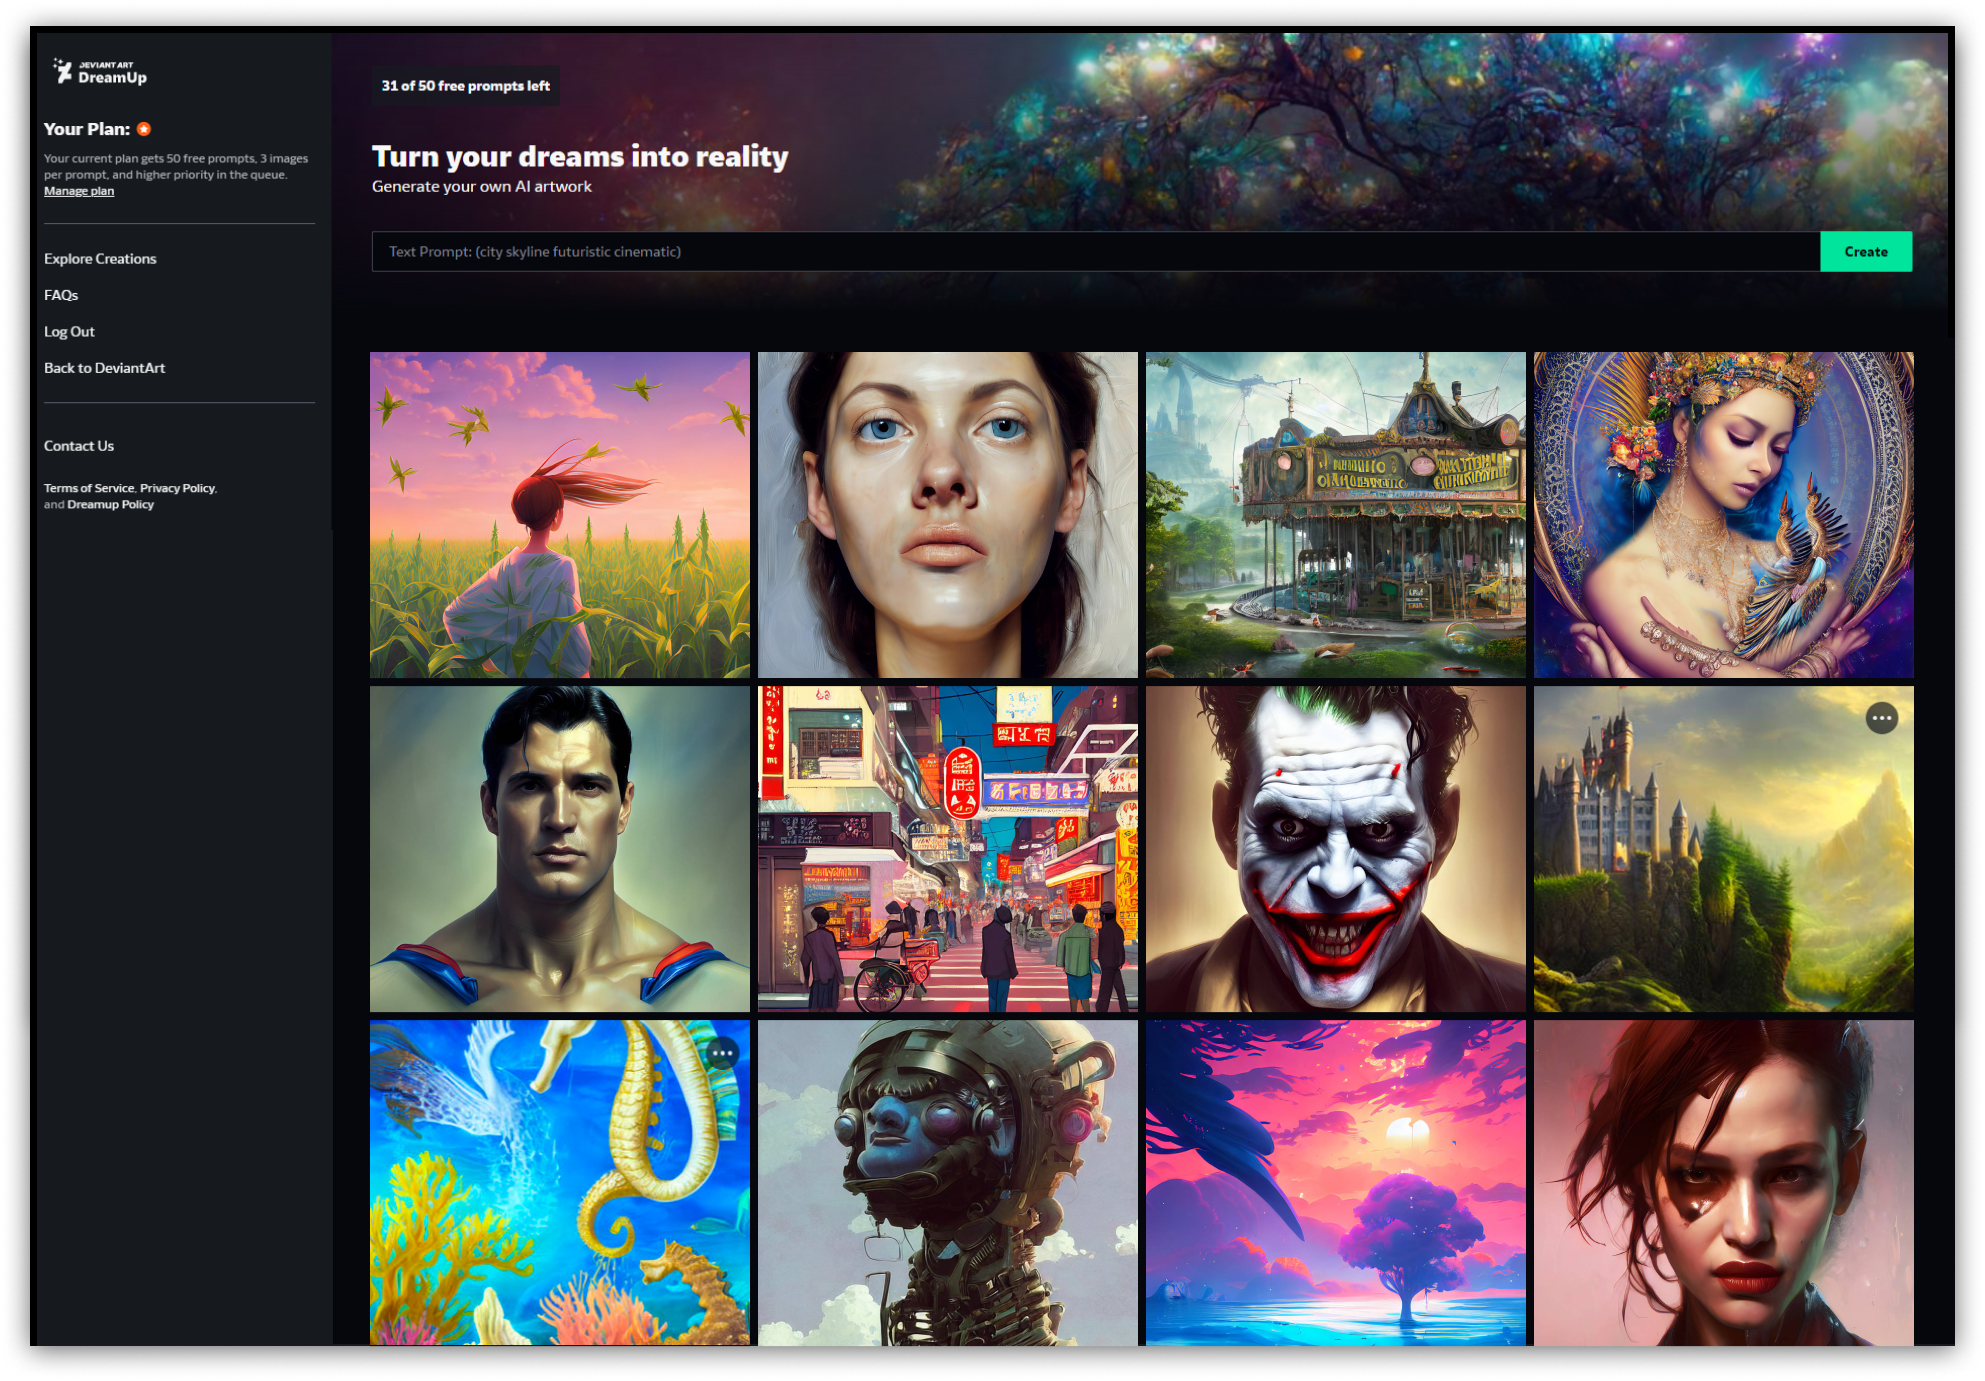 DeviantArt’s AI image generator aims to give more power to artists